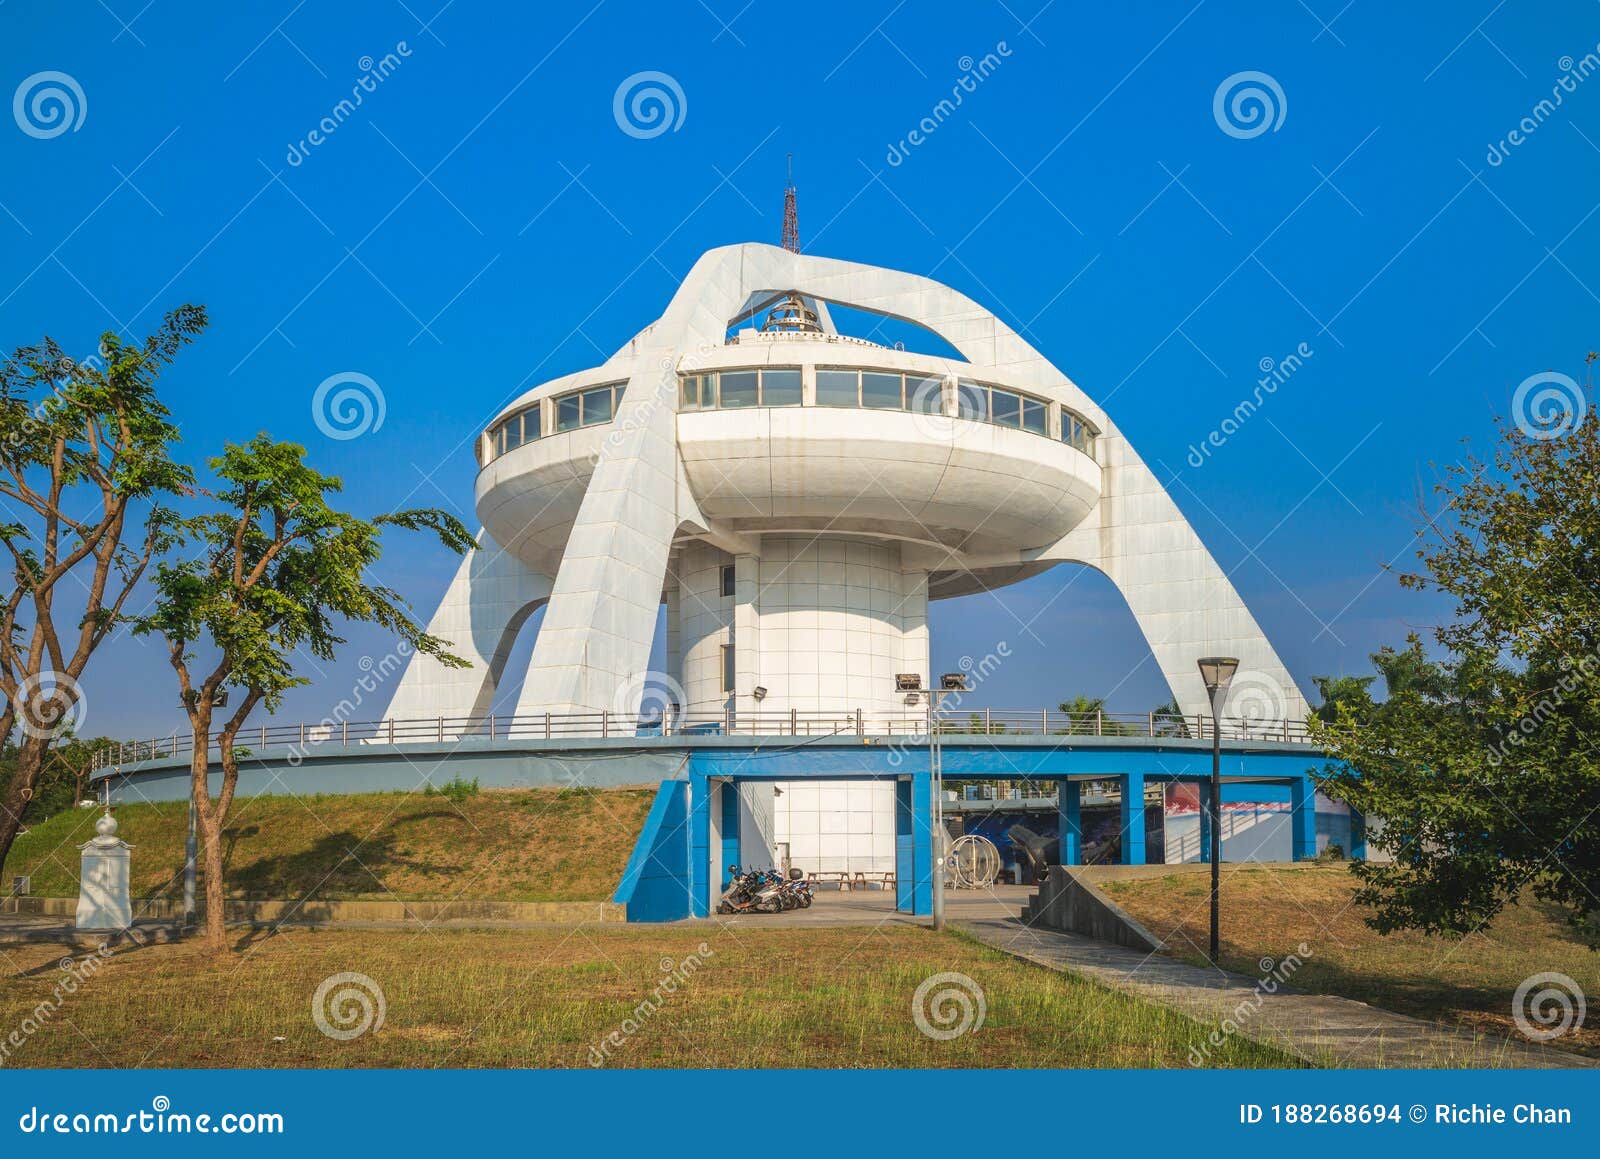 Solar Exploration Center in Chiayi Editorial Stock Image - Image of